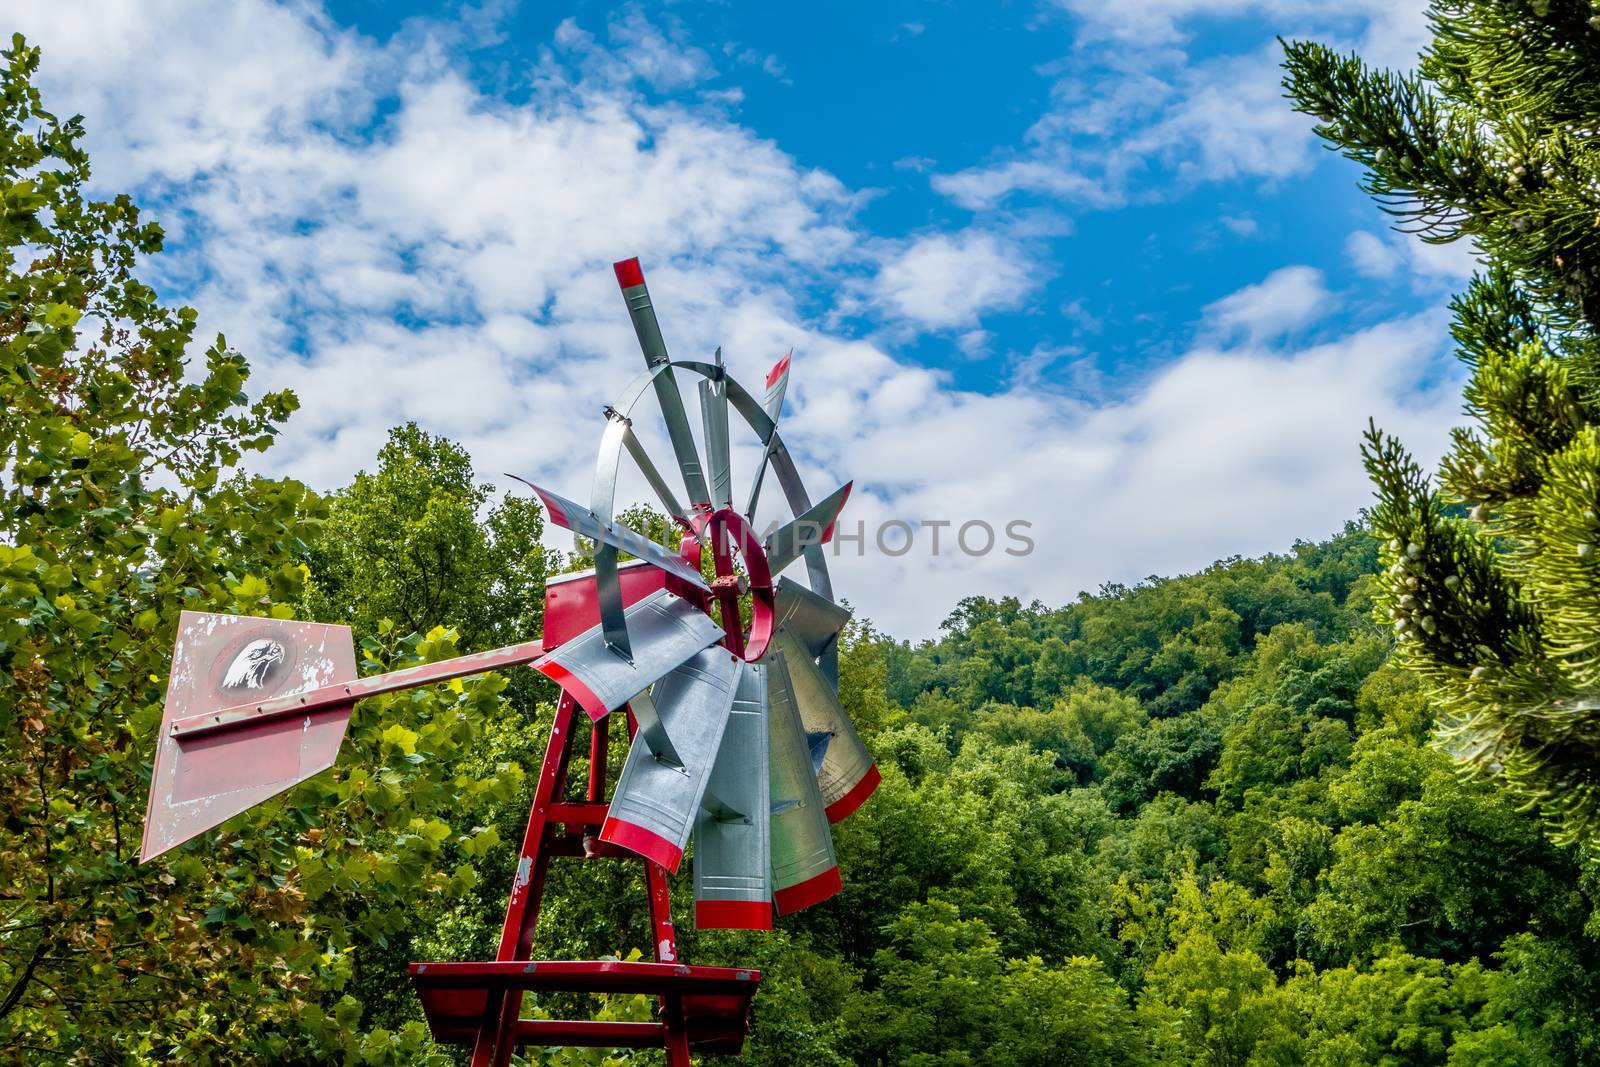 Old antique Aermotor windmill used to pump water